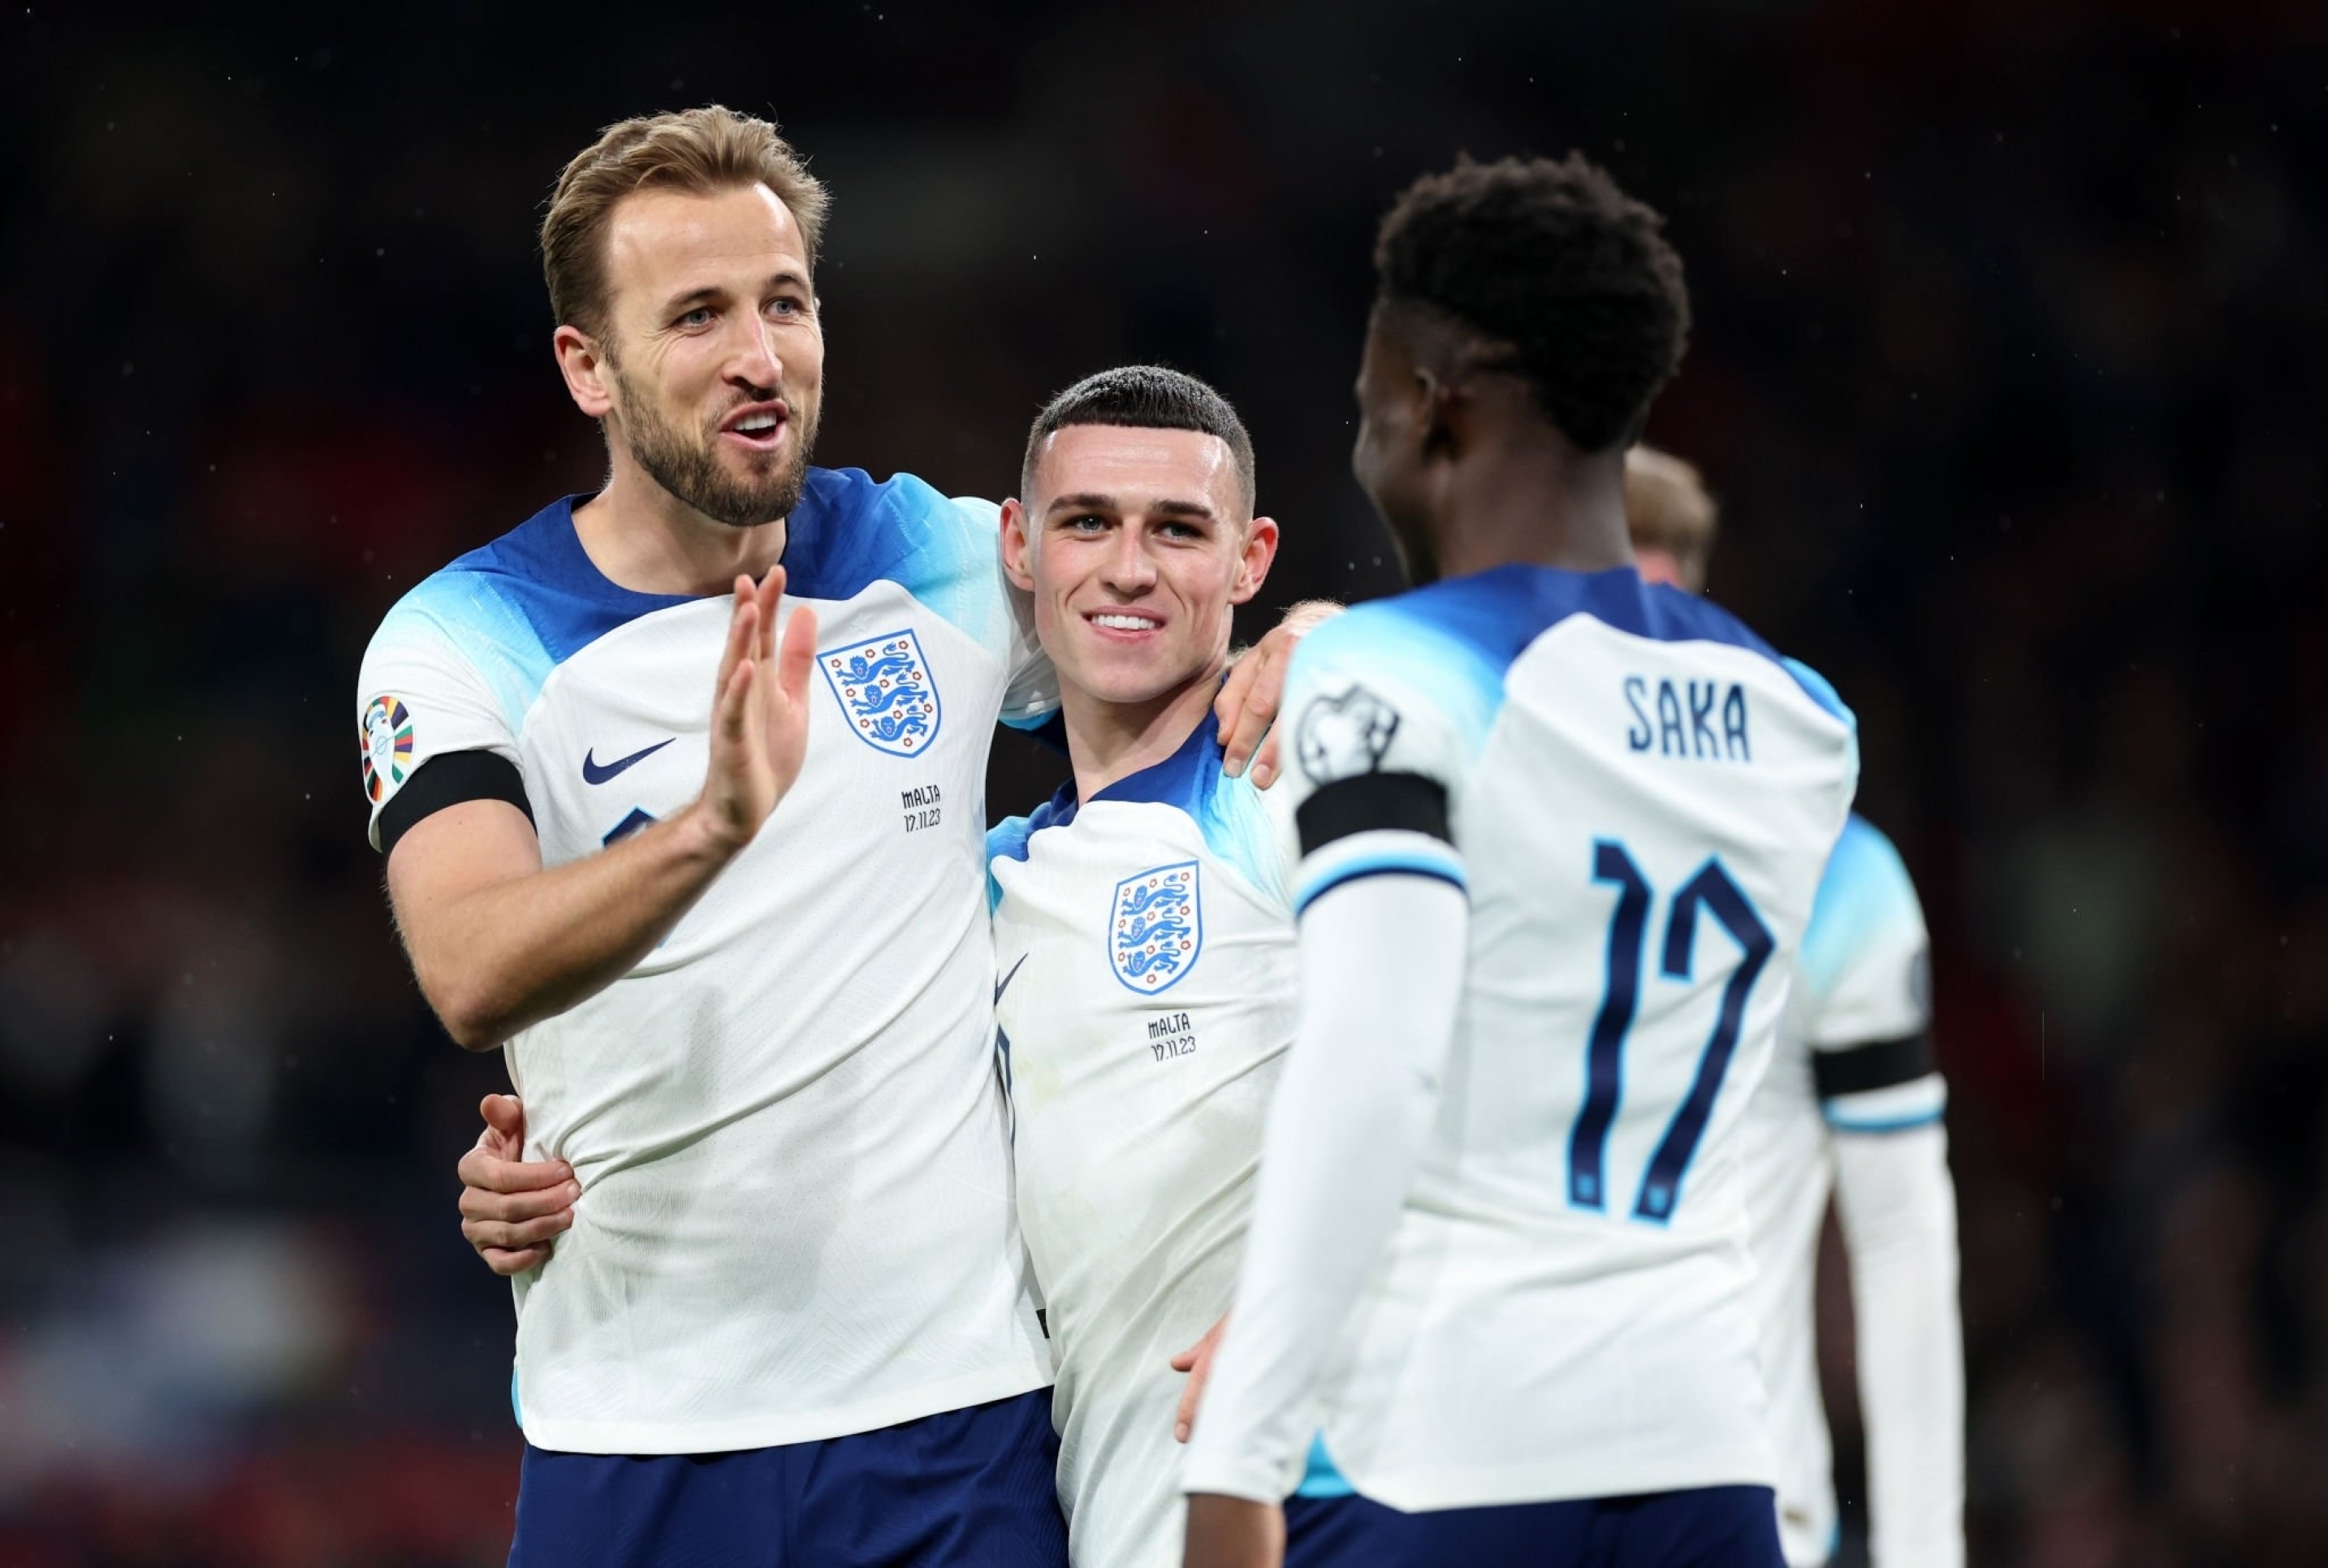 England vs North Macedonia - ENG vs MKD - The Three Lions will look to book their spot in Euro finals' Pot 1 with a win in Euro Qualifiers